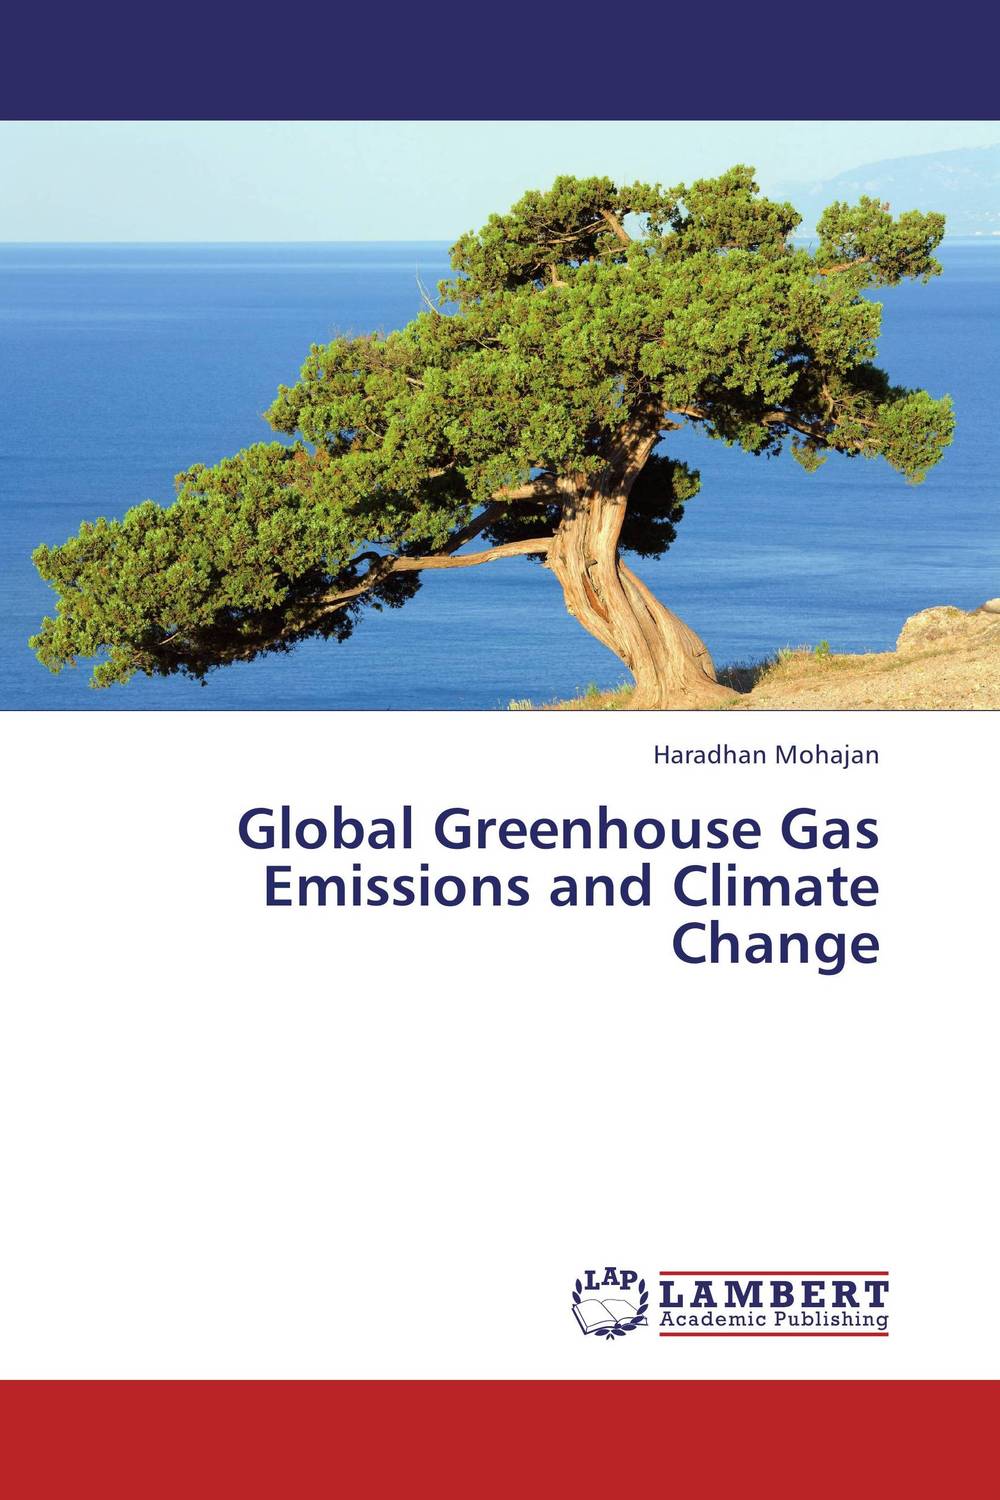 Global Greenhouse Gas Emissions and Climate Change